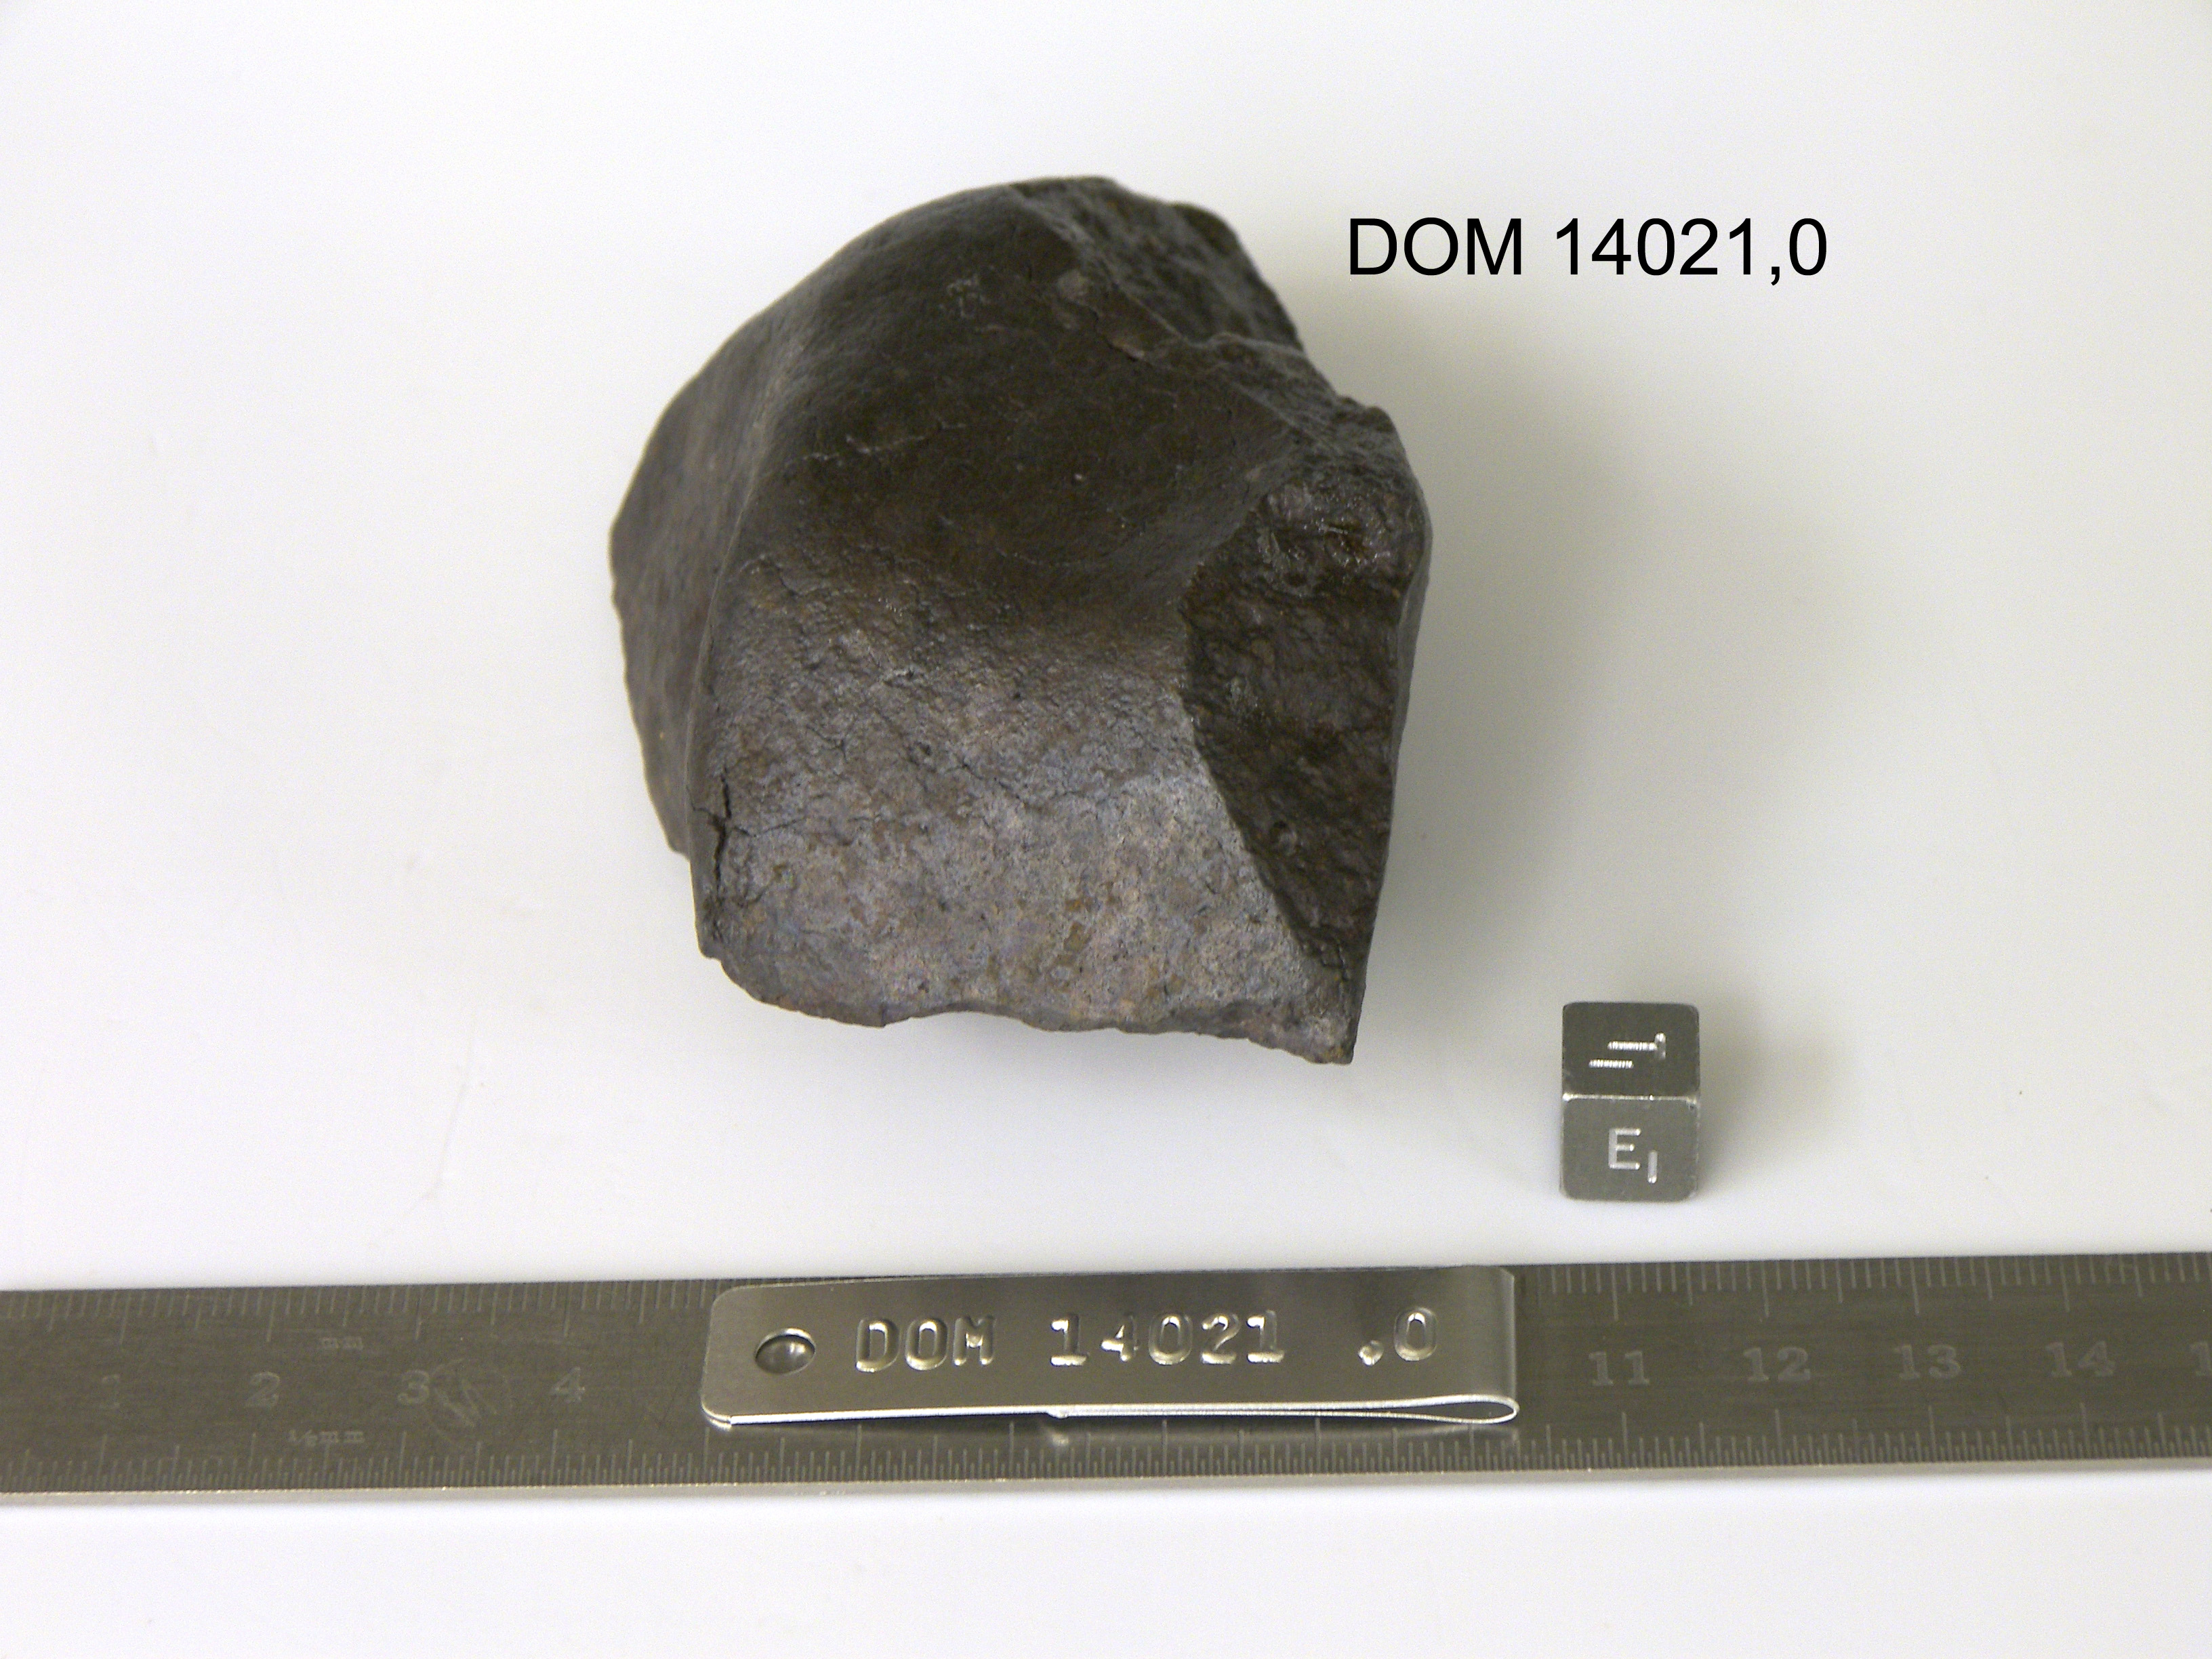 Lab Photo of Sample DOM 14021 Displaying East Orientation